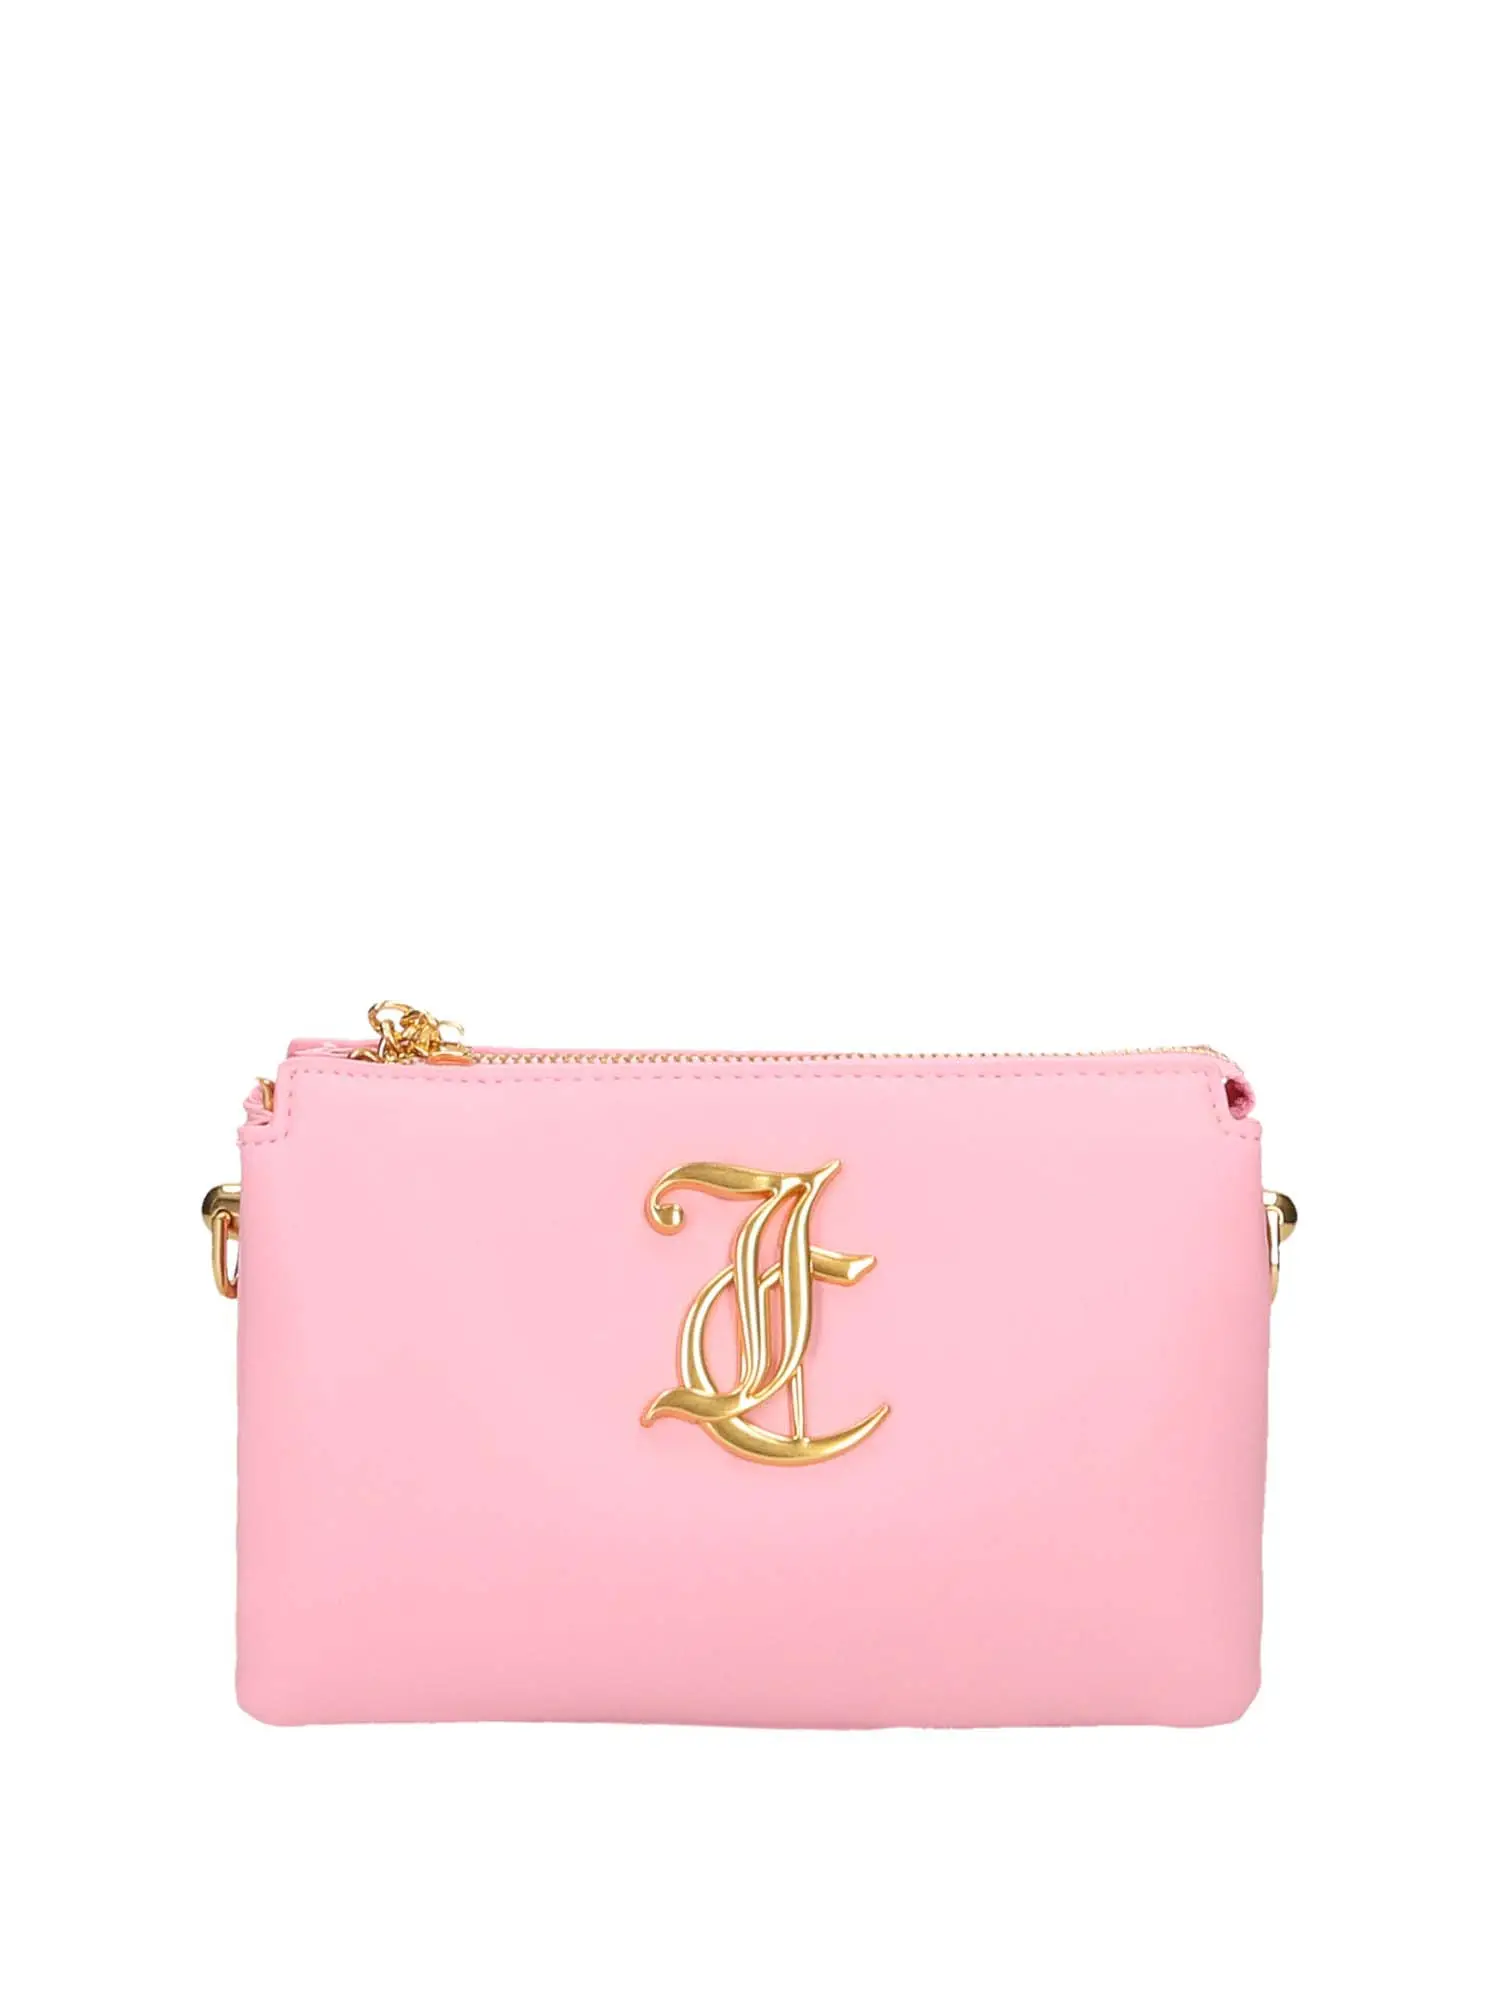 TRACOLLA DONNA - JUICY COUTURE - BIJAY4122WVP - ROSA, UNICA